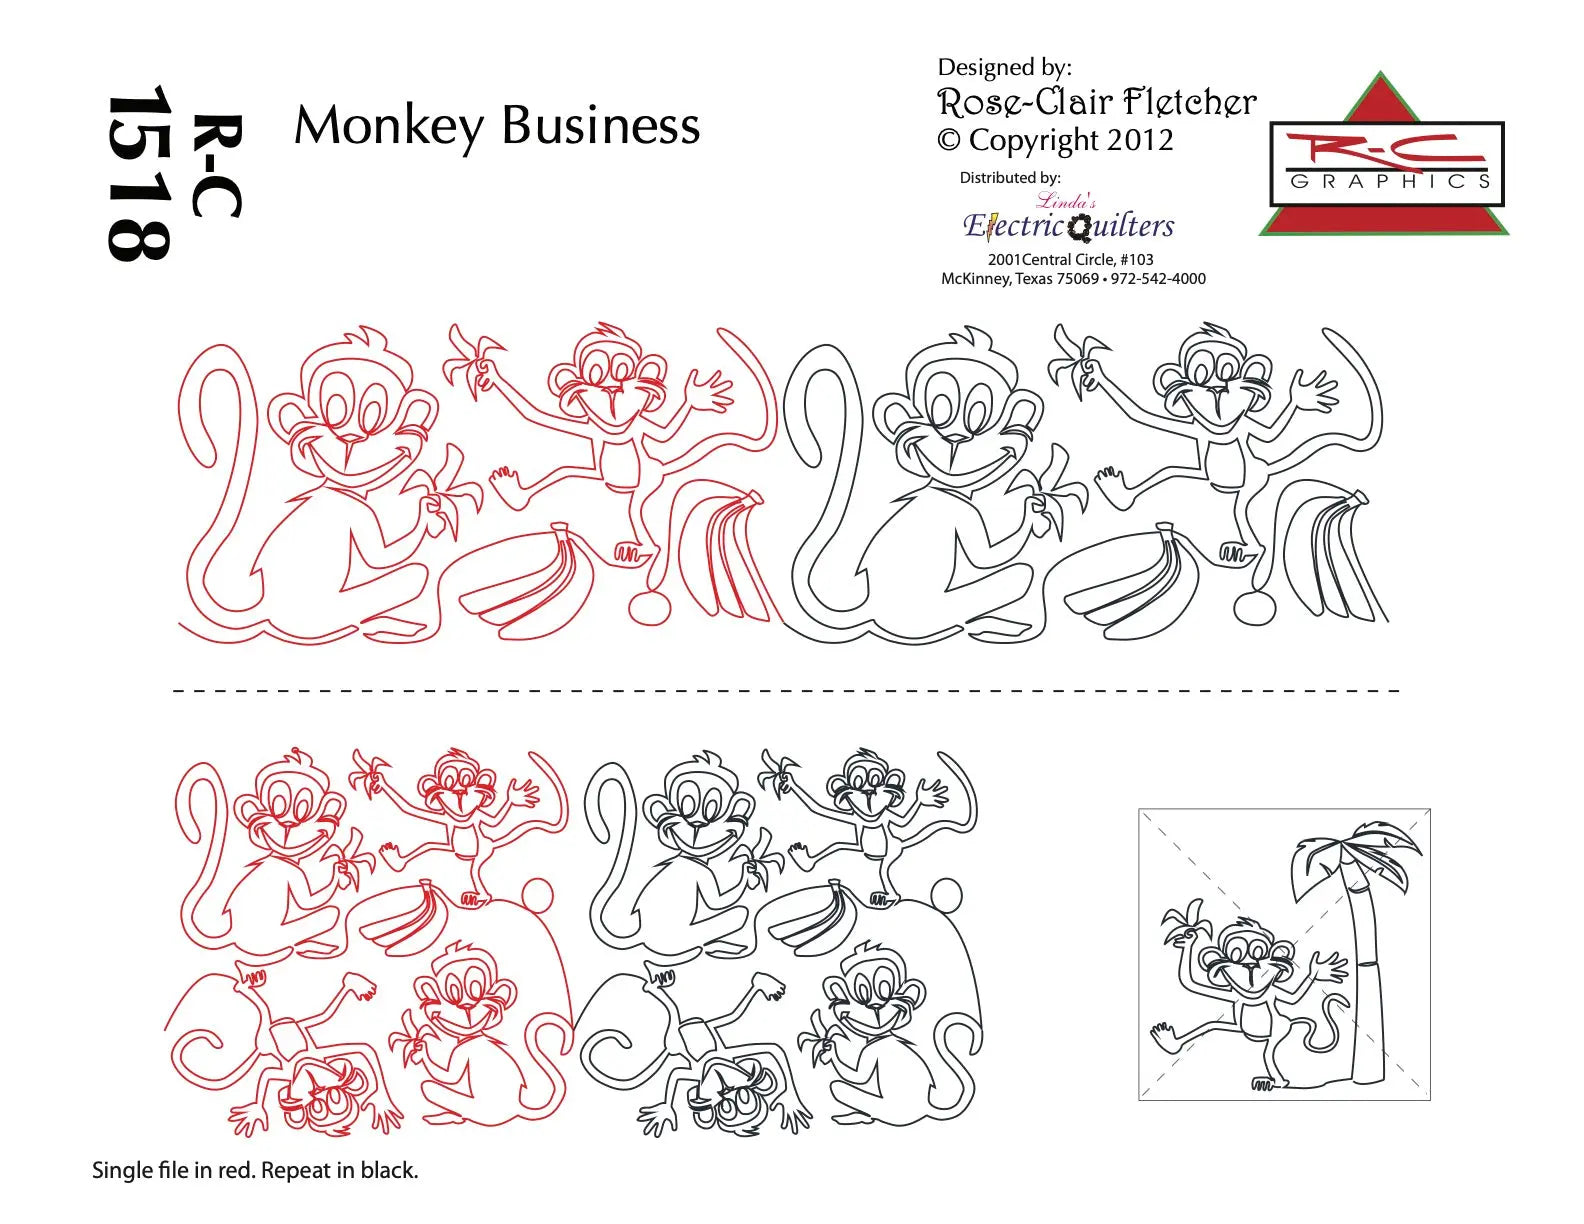 1518 Monkey Business Pantograph by Rose-Clair Fletcher - Linda's Electric Quilters